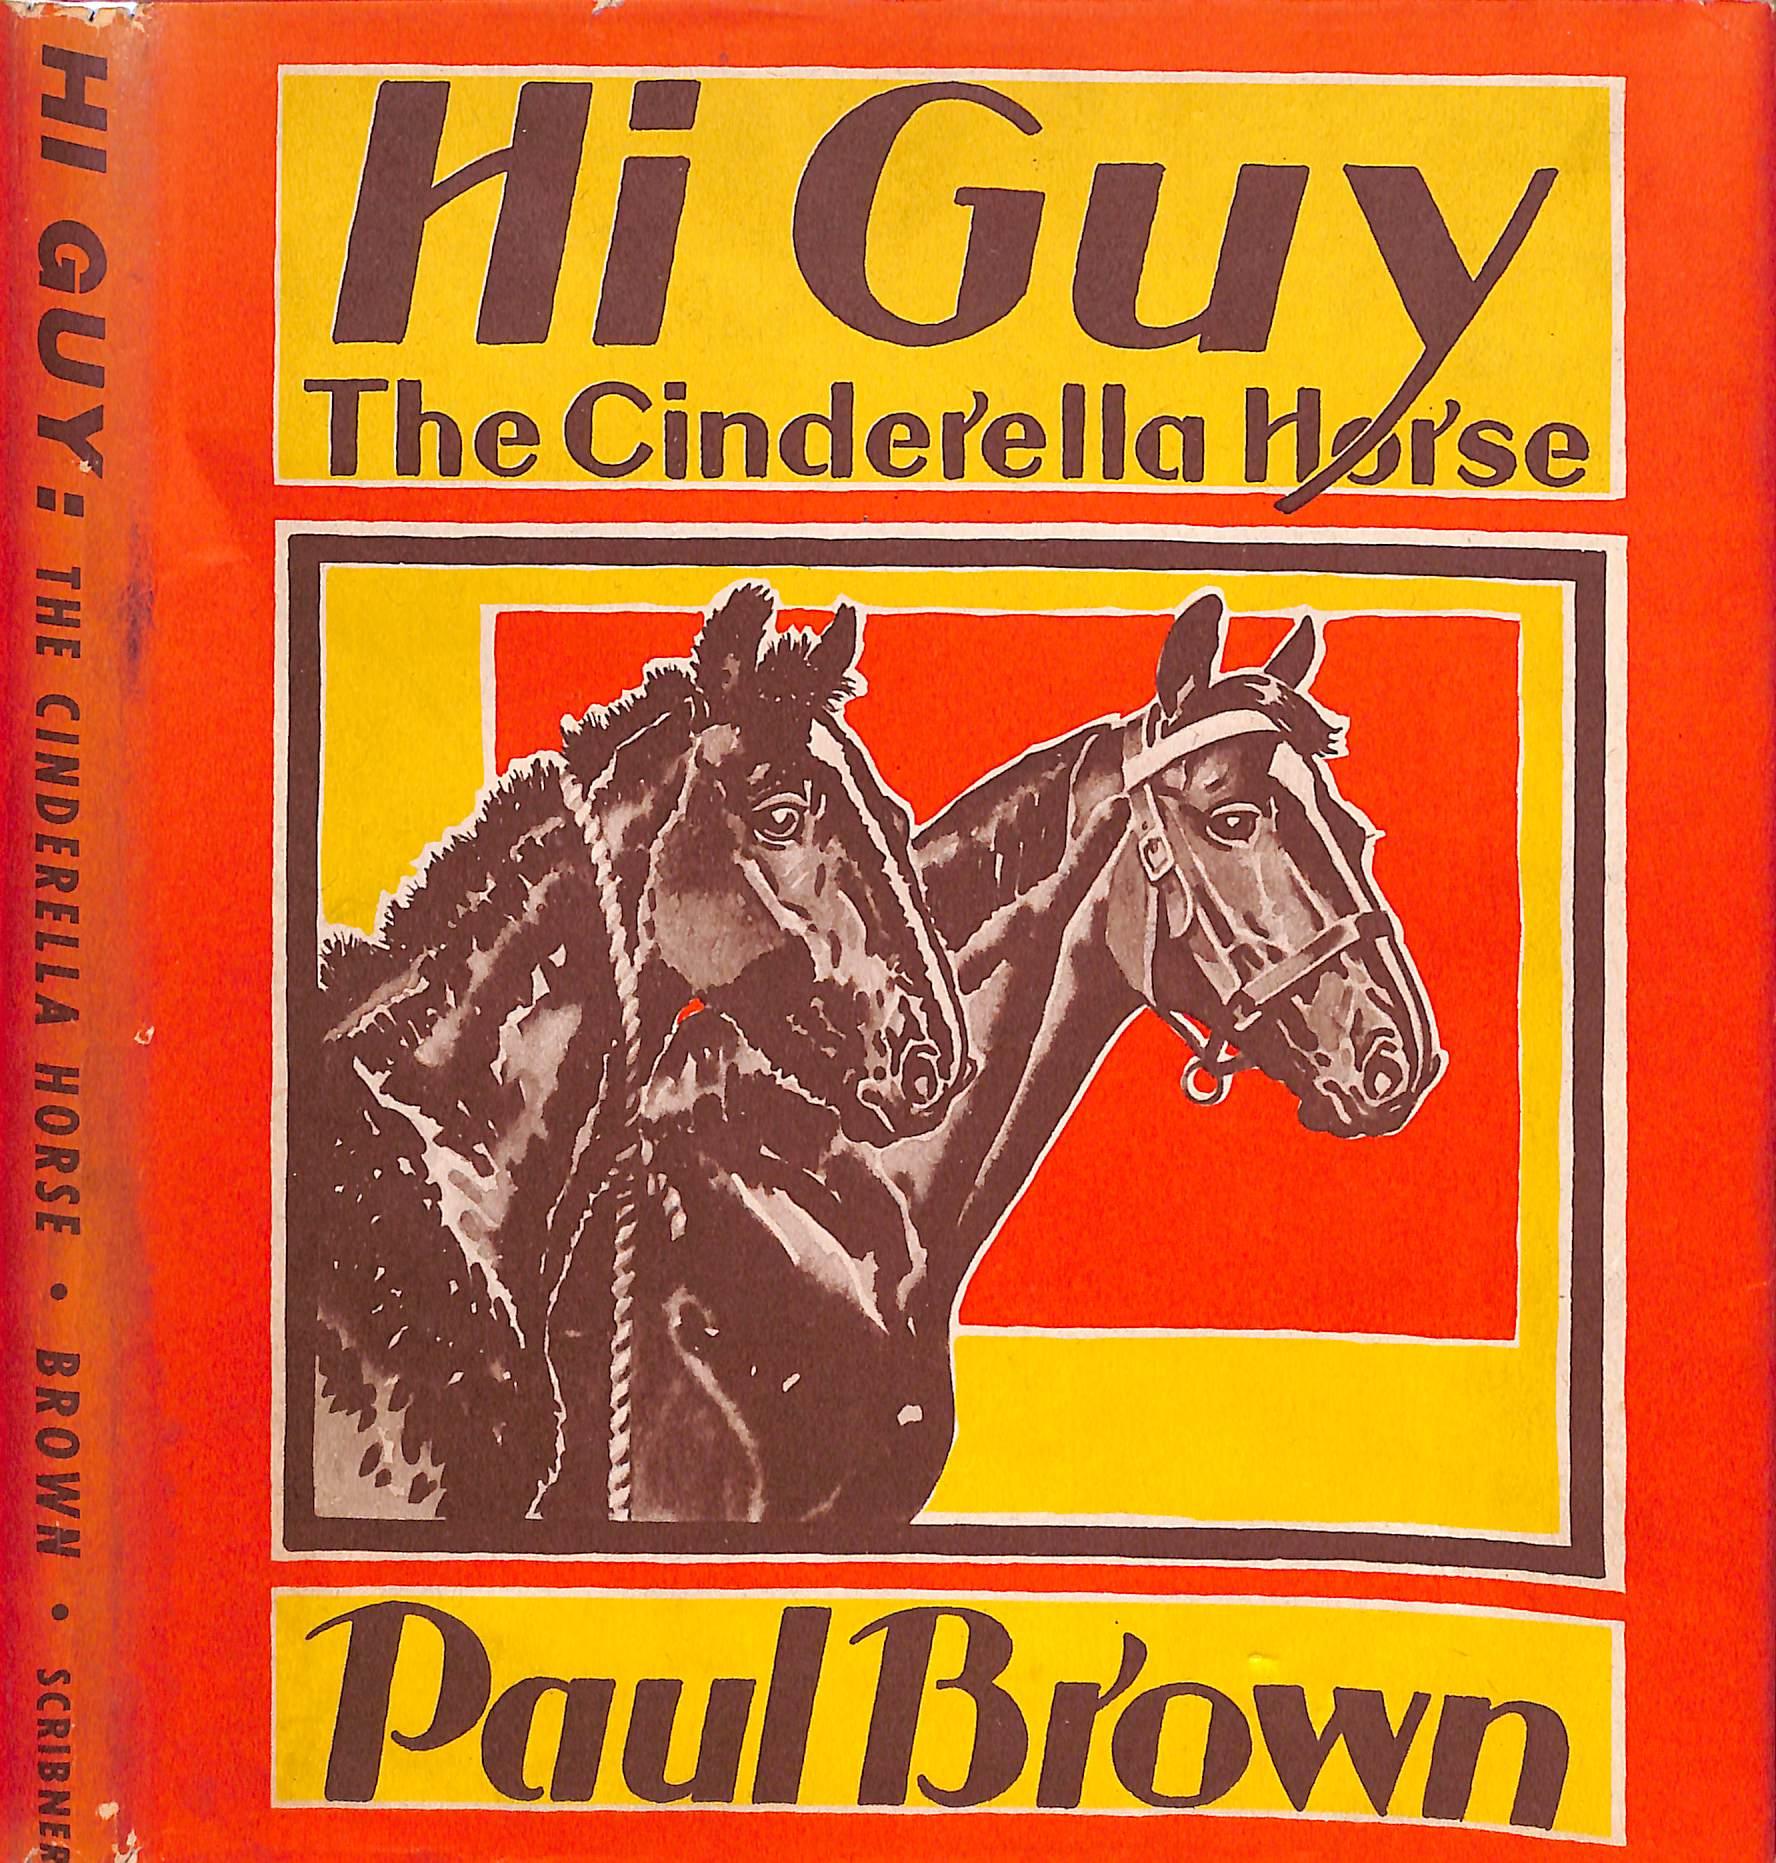 Original 1944 Pencil Drawing From Hi, Guy! The Cinderella Horse By Paul Brown 29 For Sale 5